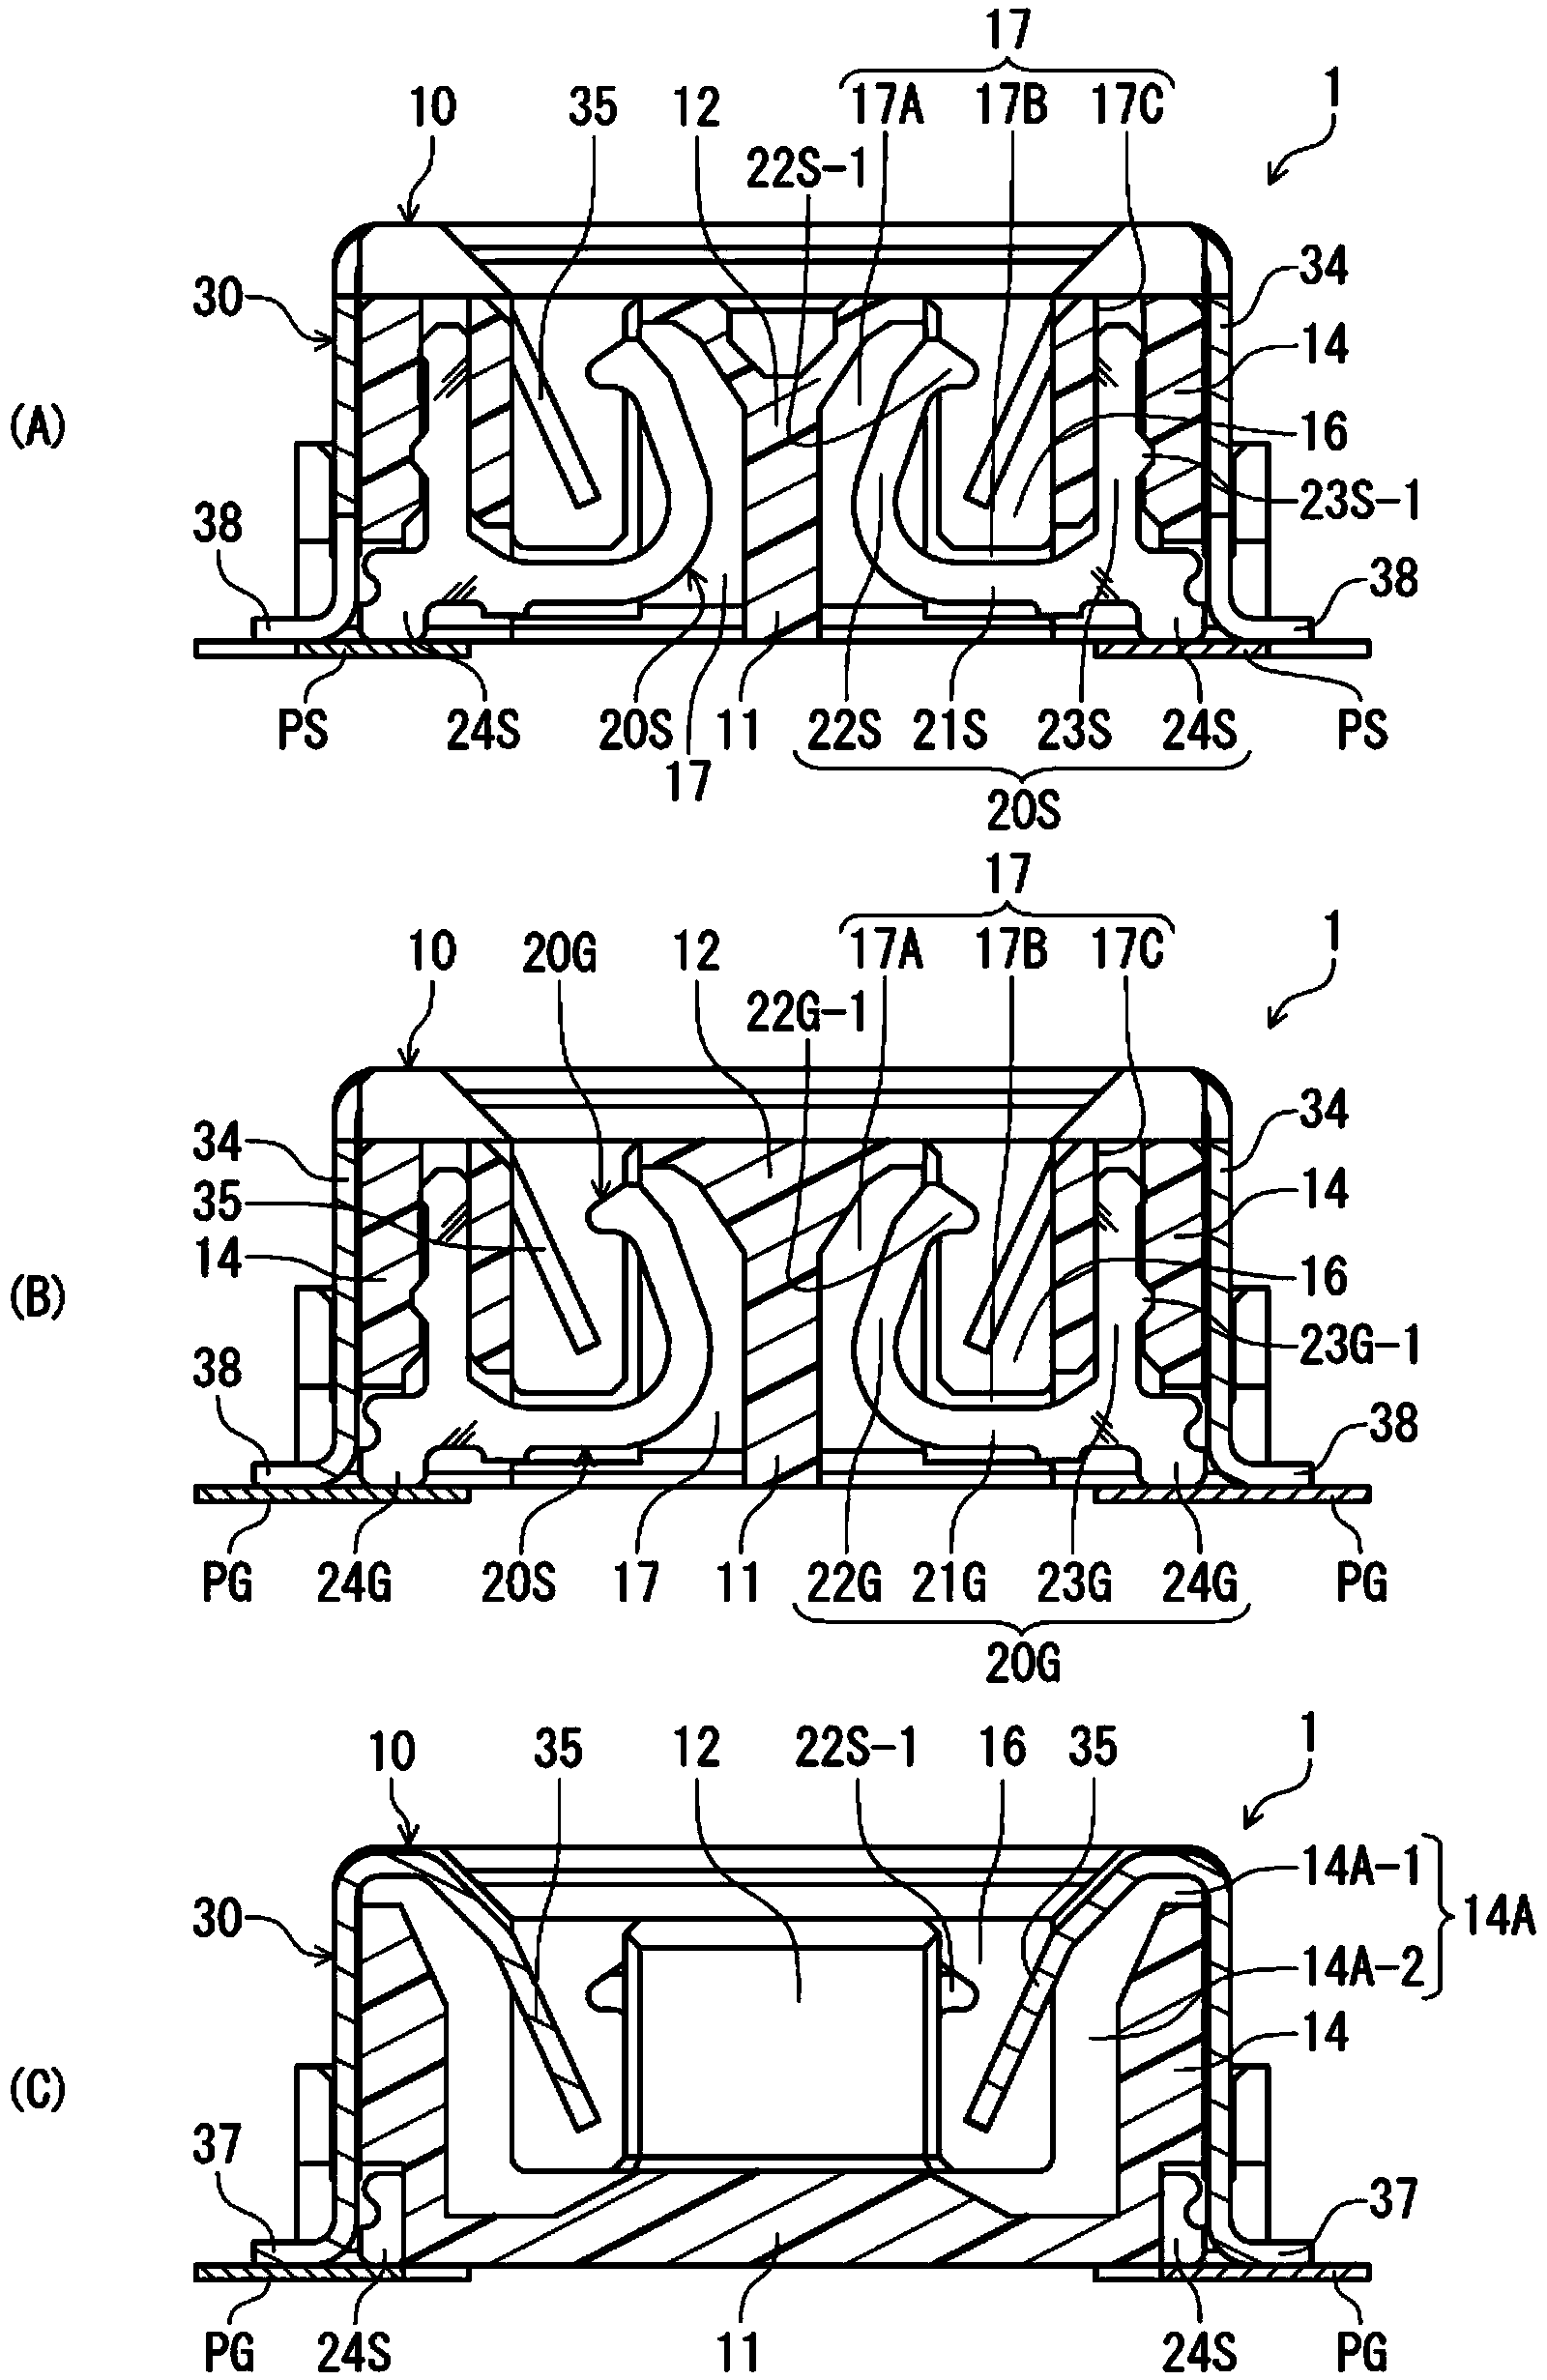 Electrical connector for circuit board and electrical connector installation body